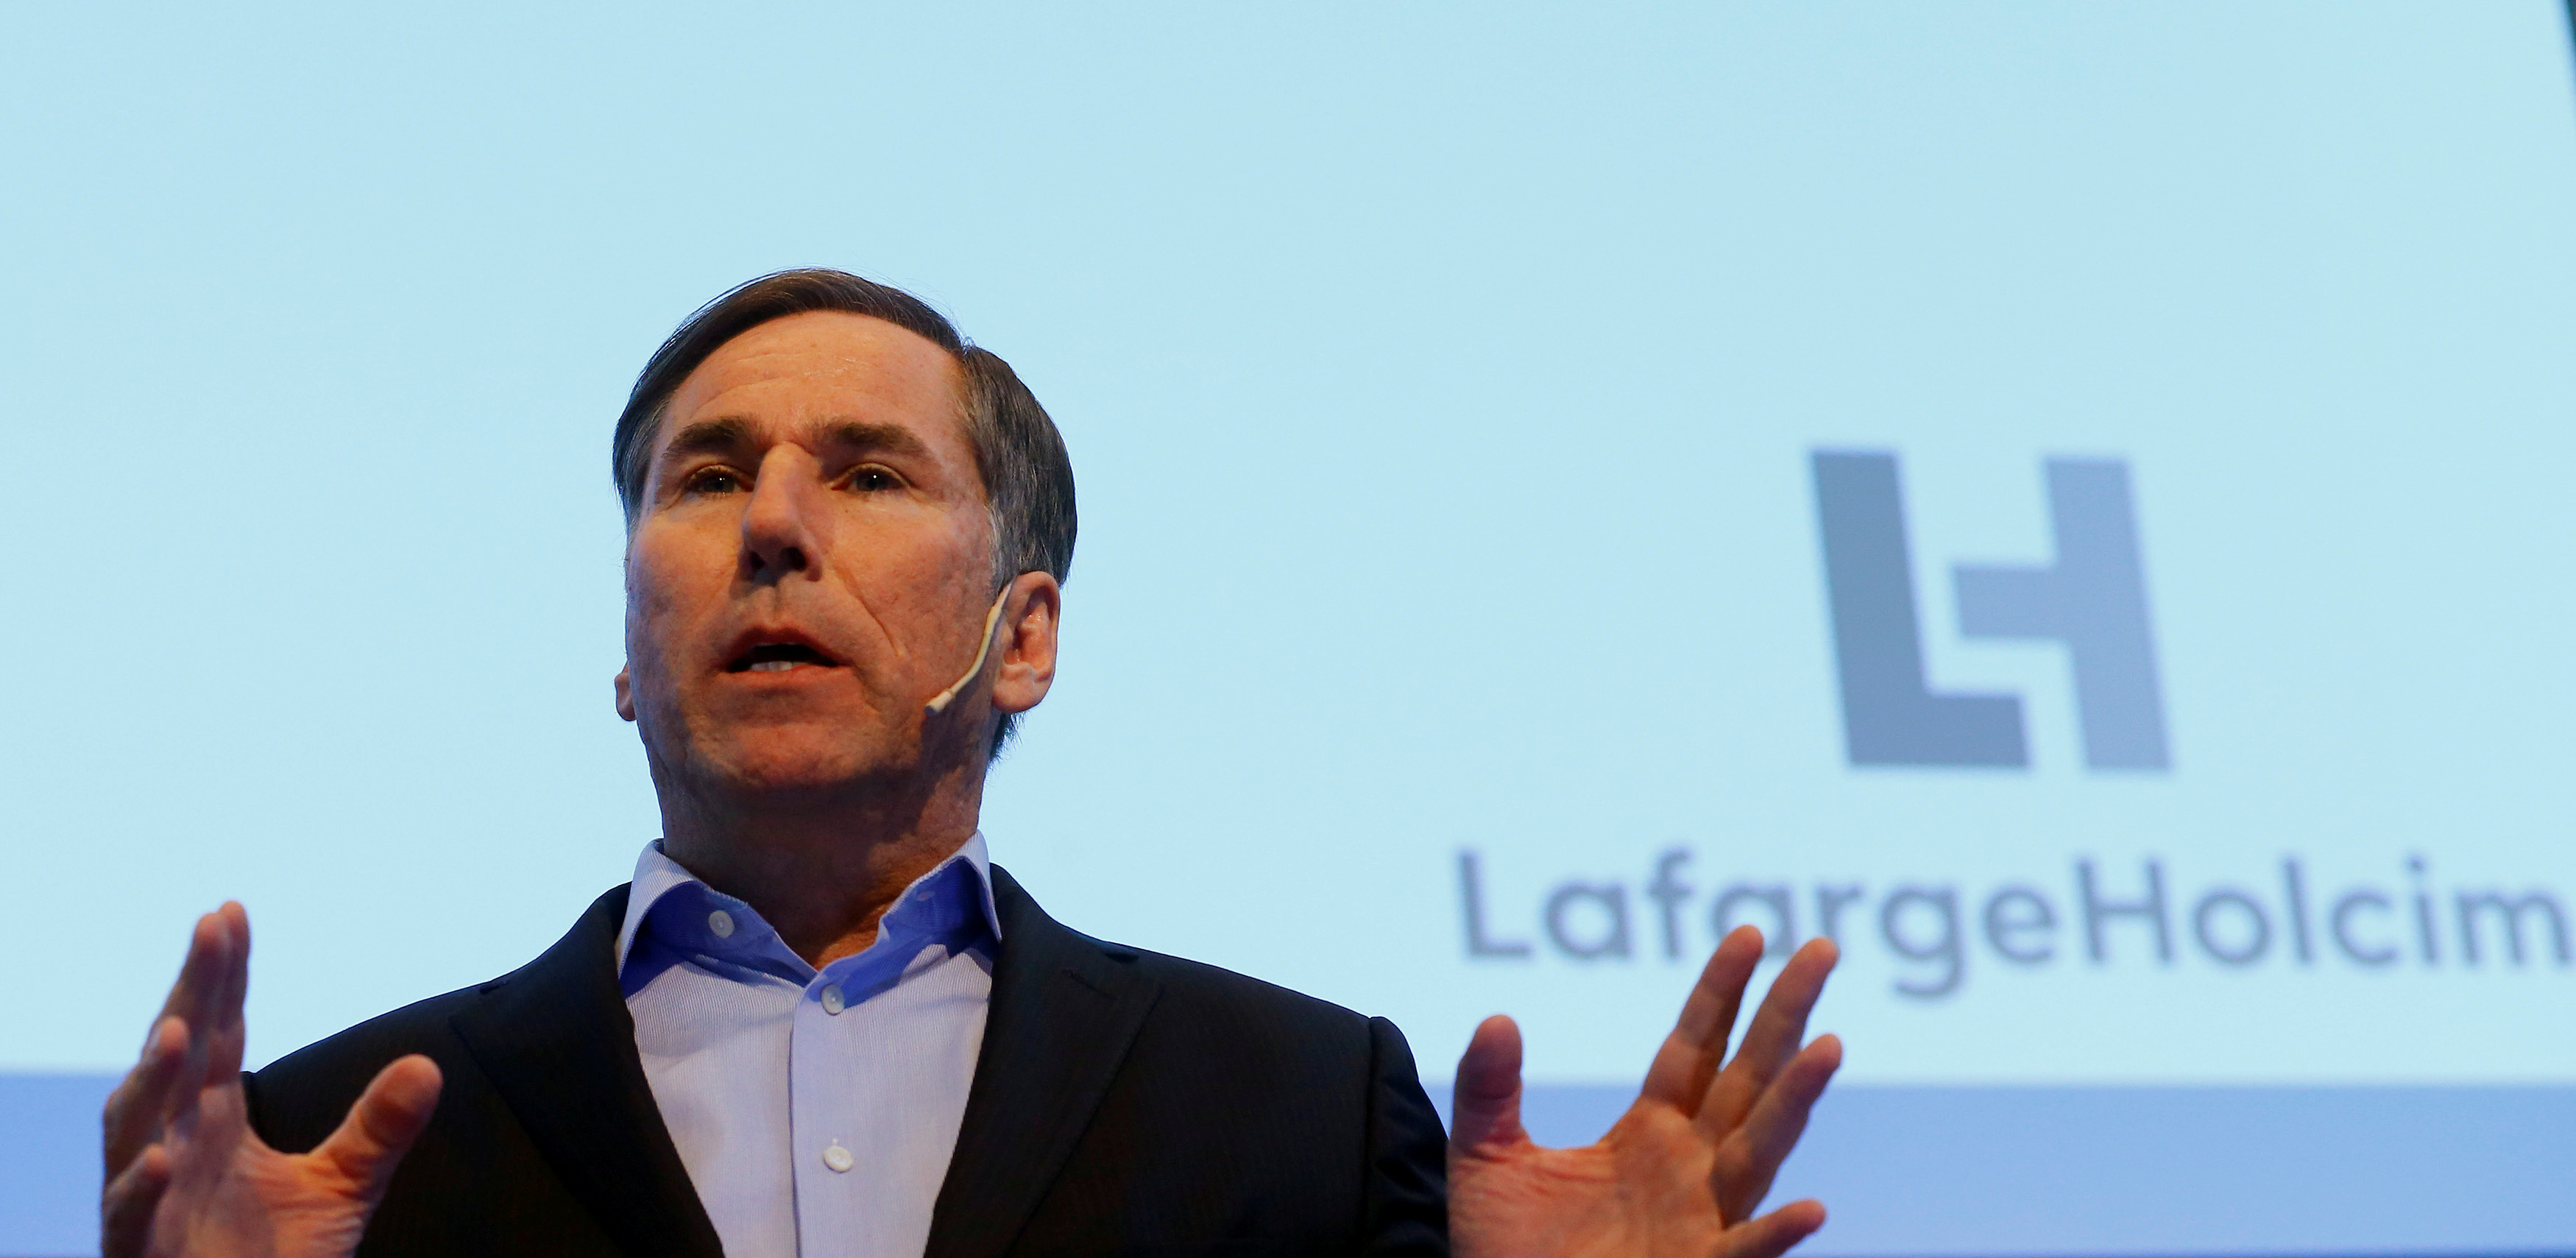 CEO Jenisch of LafargeHolcim addresses the annual news conference in Zurich